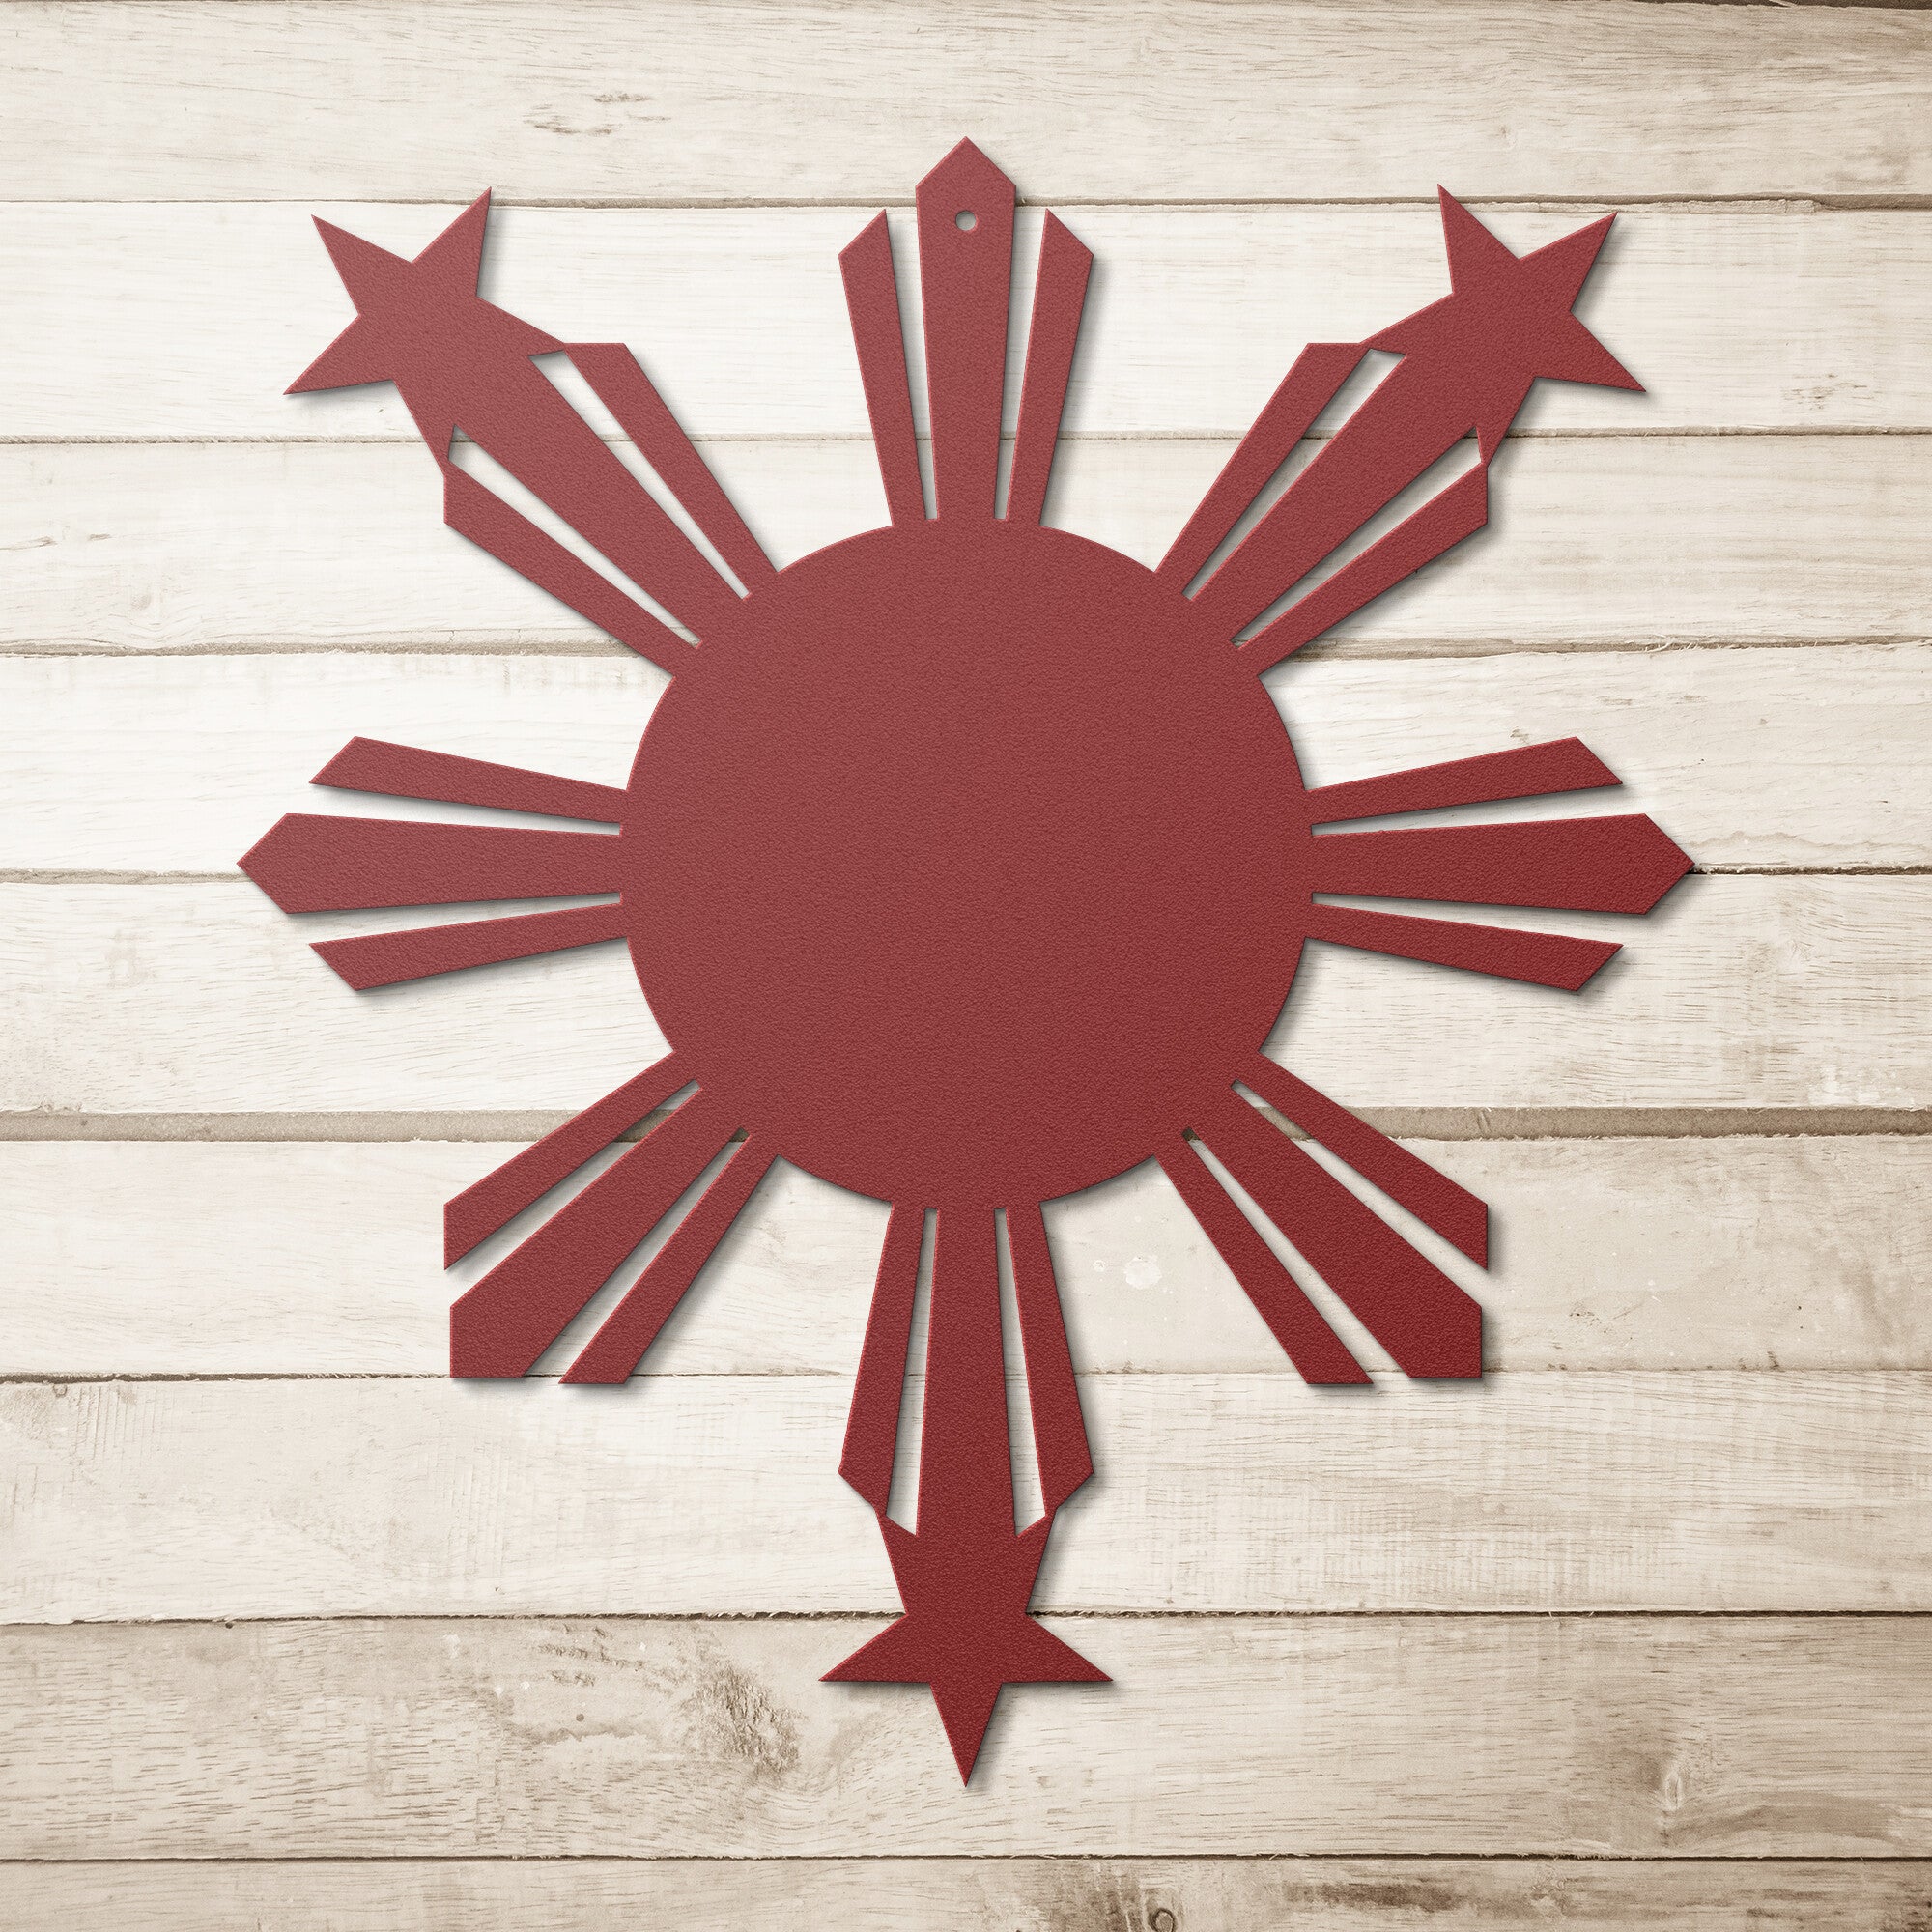 Philippines Sun and Stars Metal Wall Decor Sign